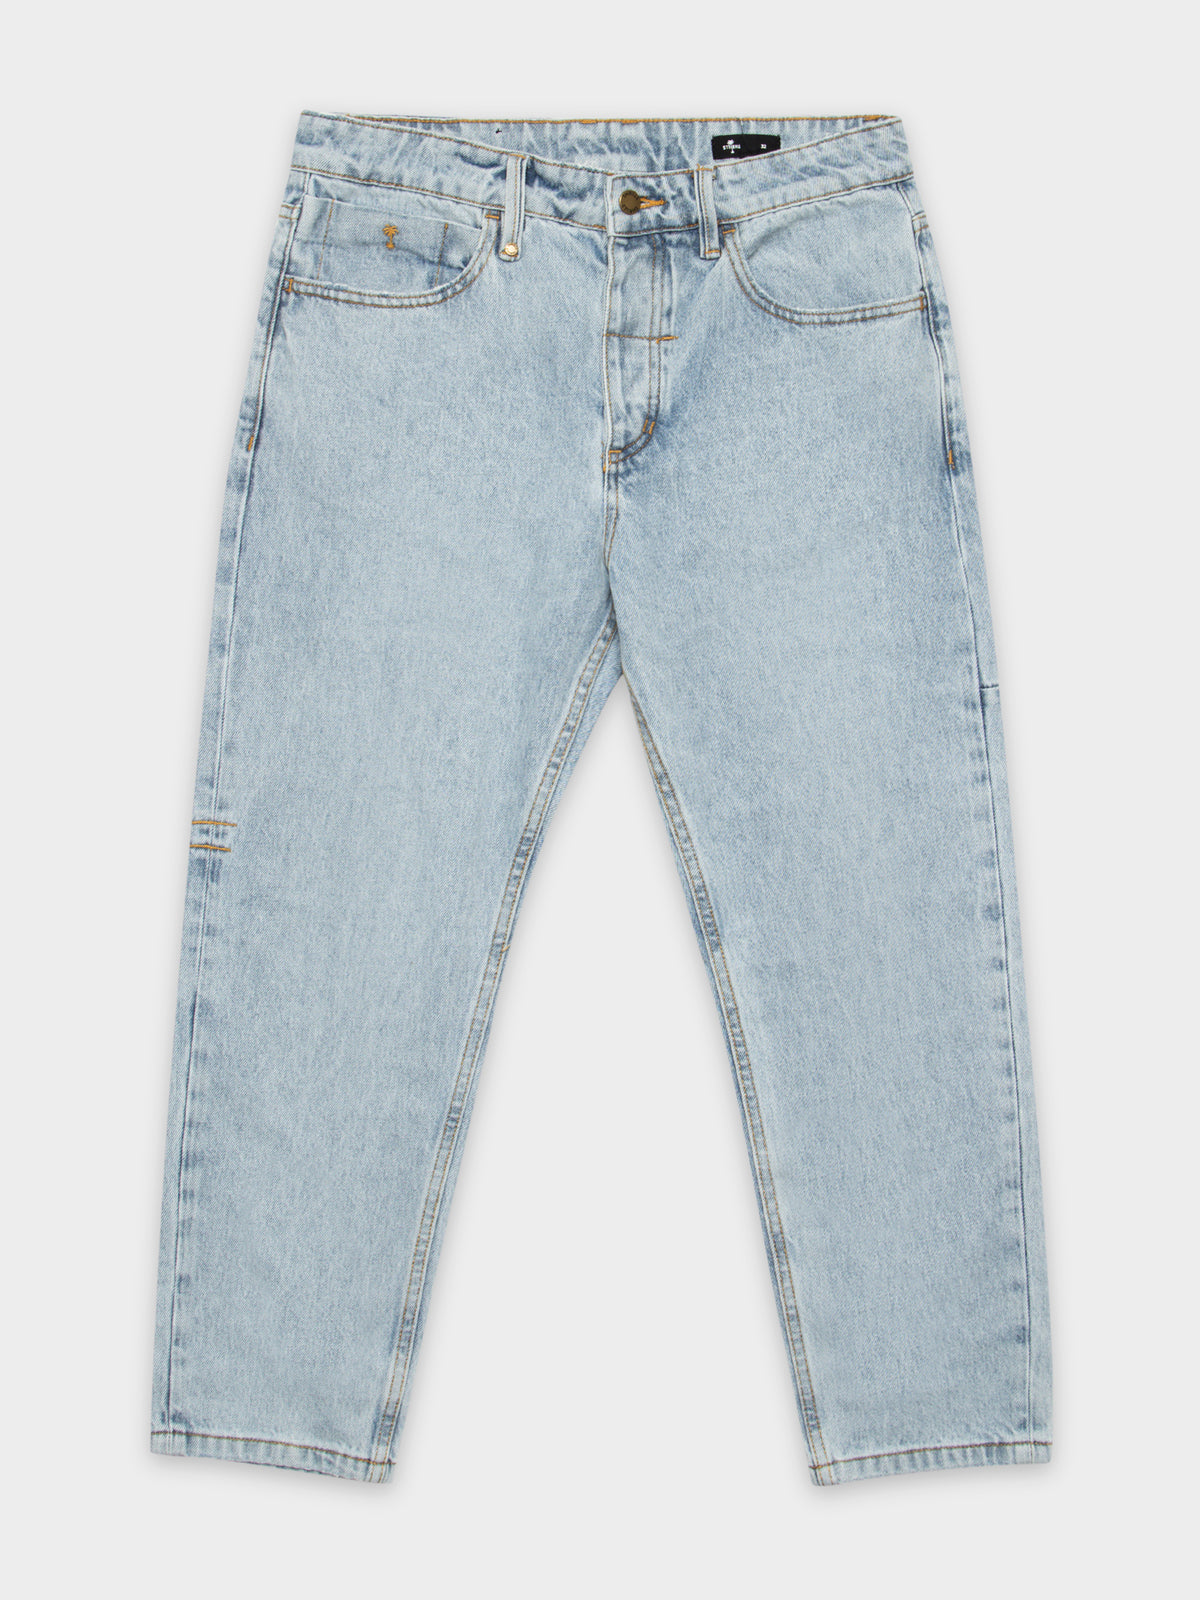 Chopped Jeans in Time Worn Blue